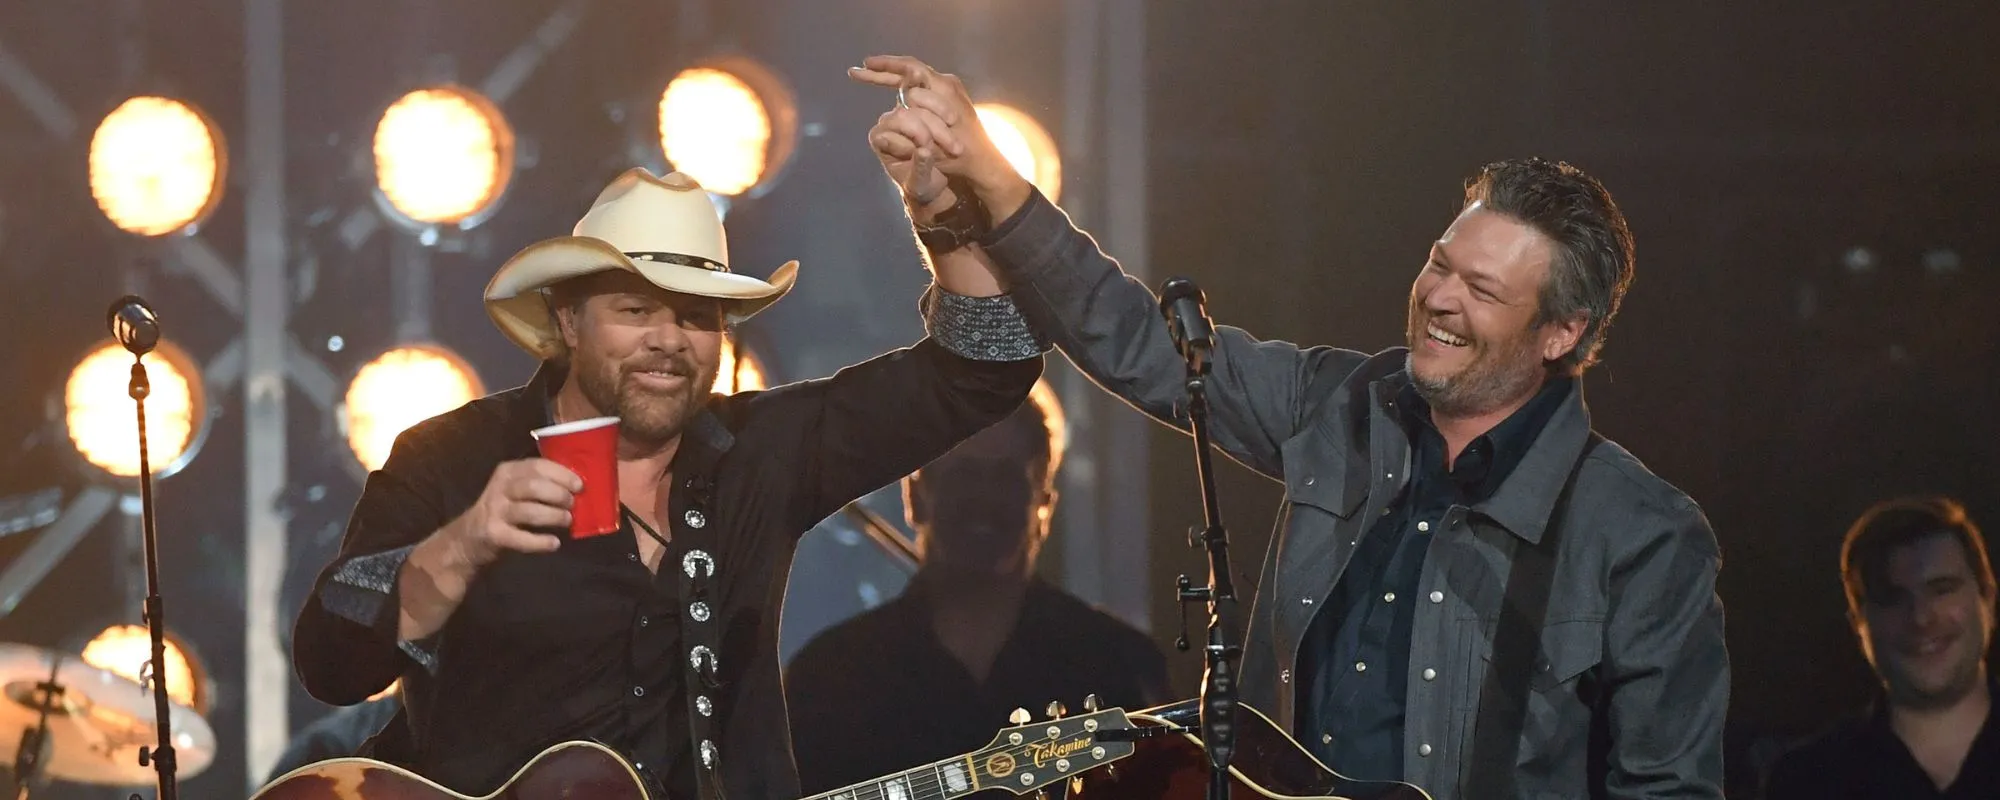 The Time Toby Keith and Blake Shelton Joined Forces for Rousing “Should’ve Been a Cowboy” Duet at the ACM Awards